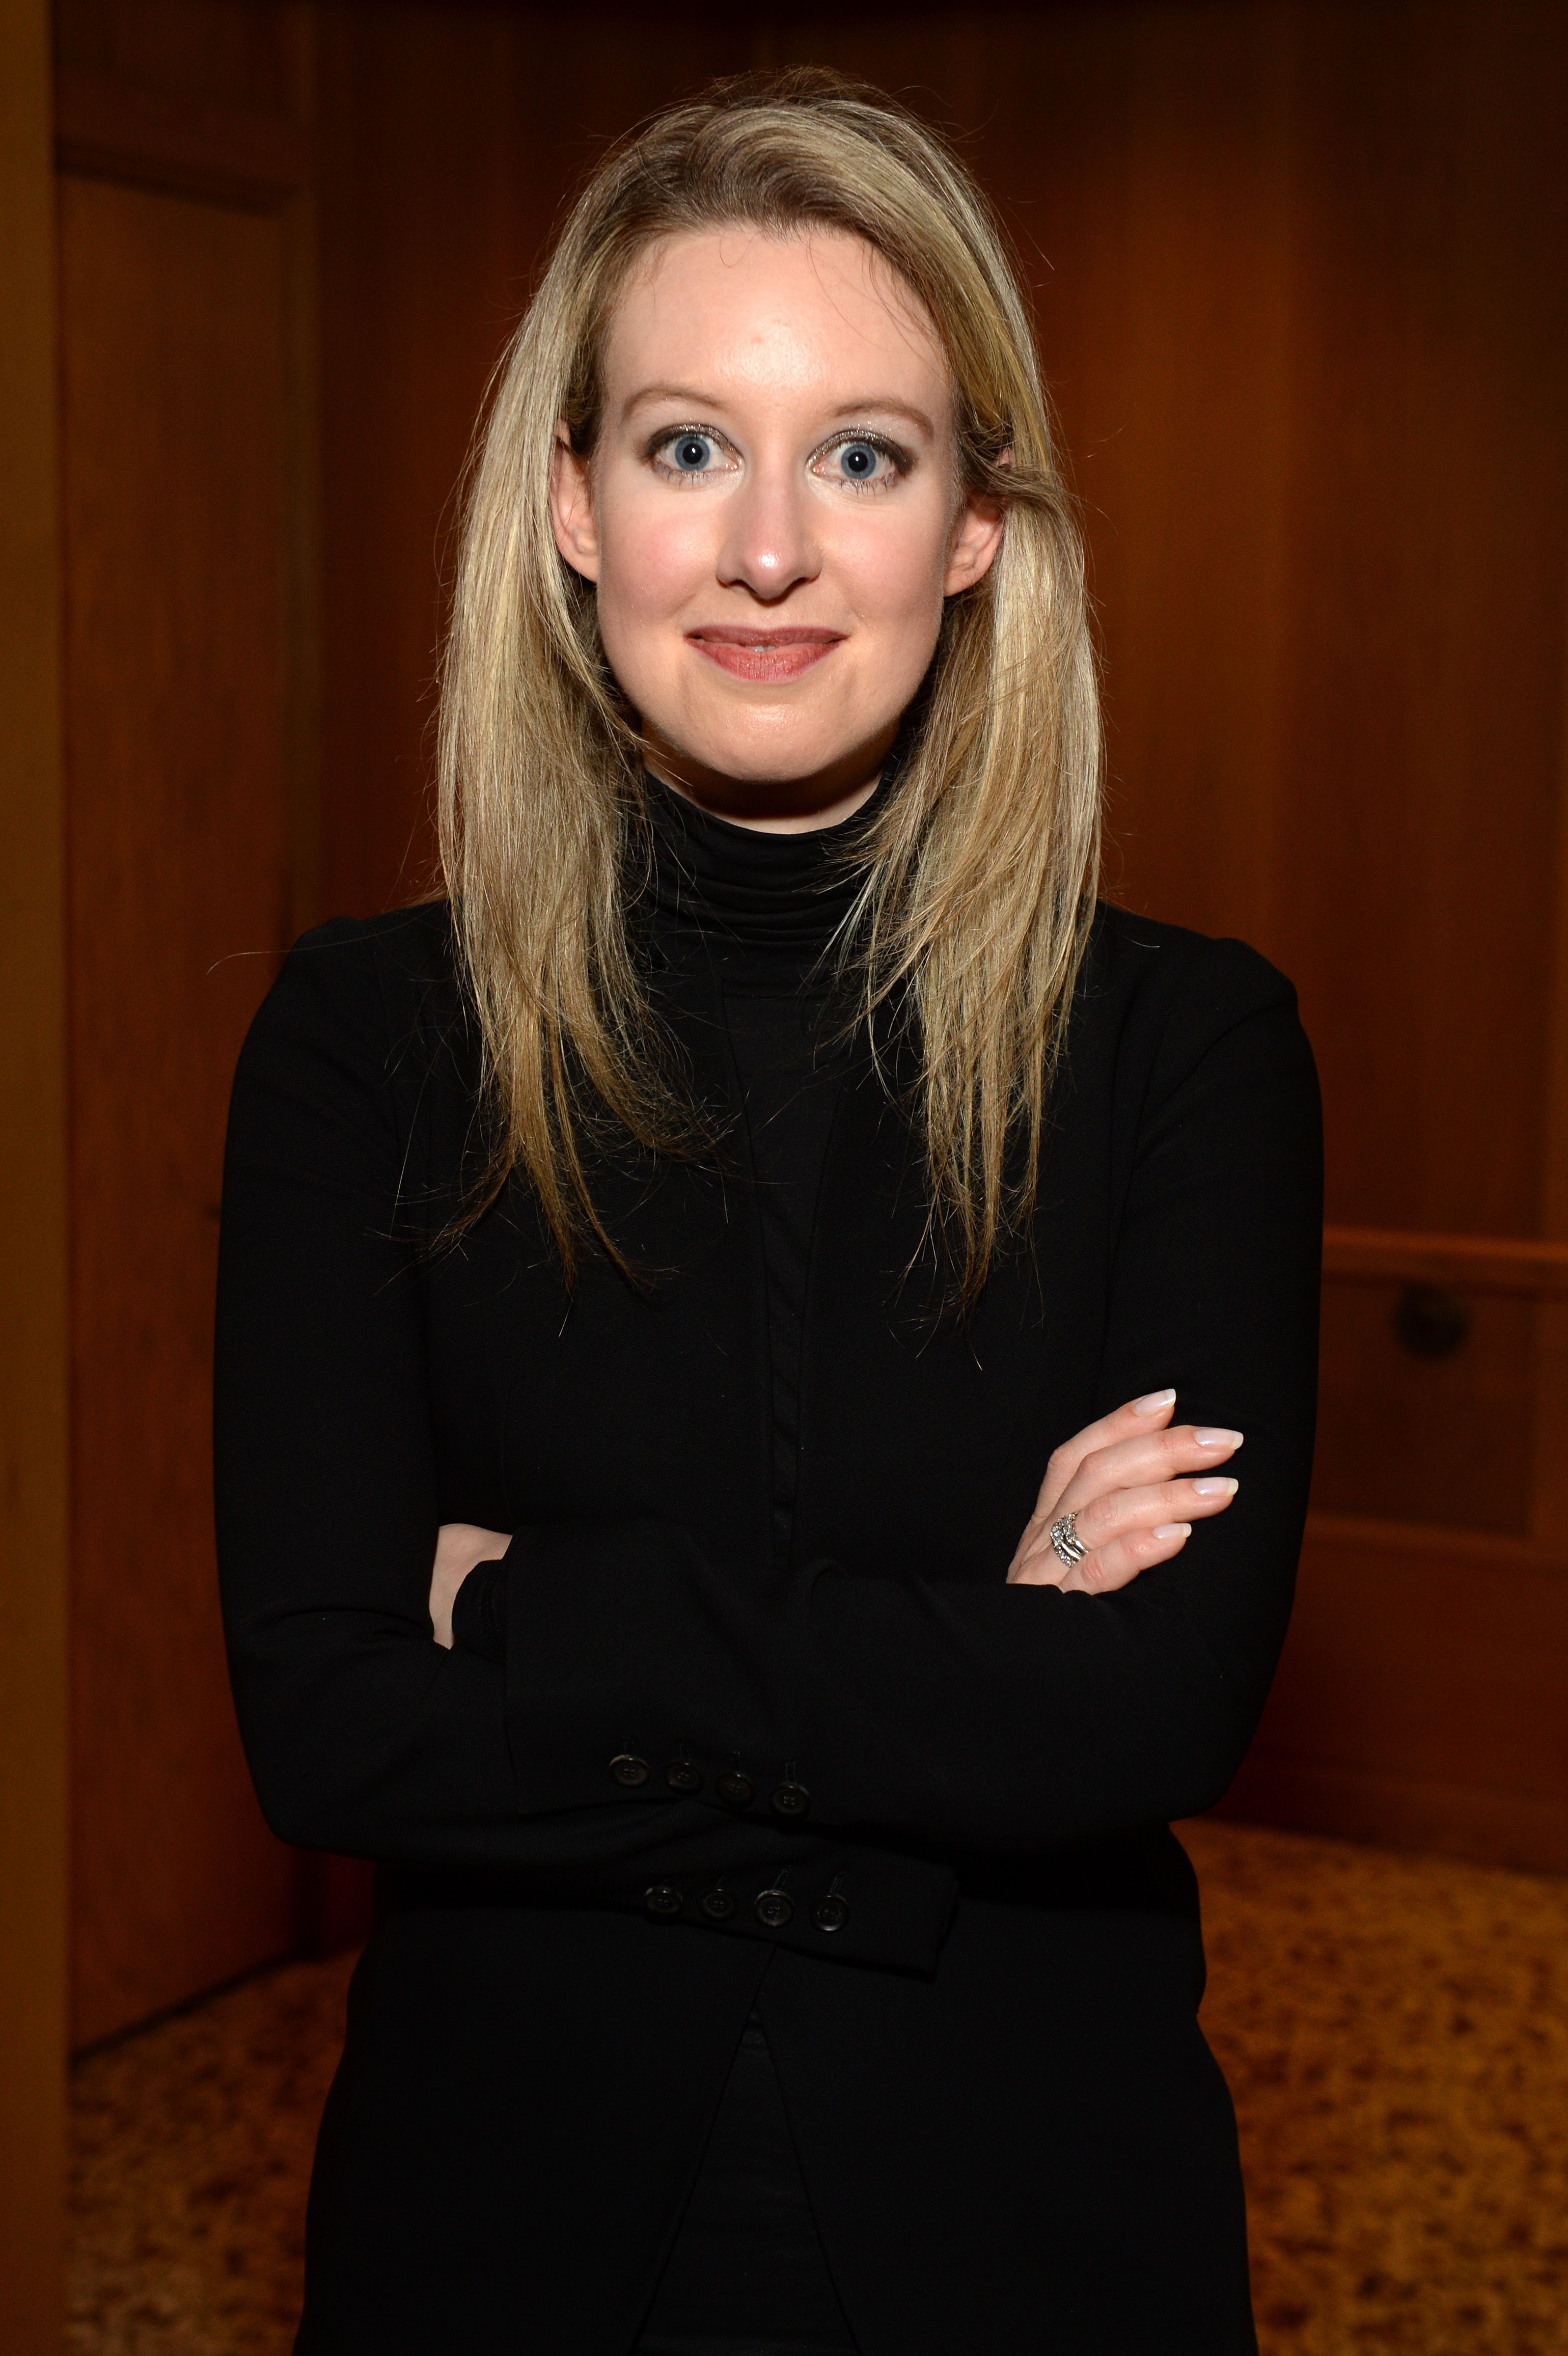 theranos-founder-and-c-e-o-elizabeth-holmes-attends-the-news-photo-491609918-1553106765.jpg